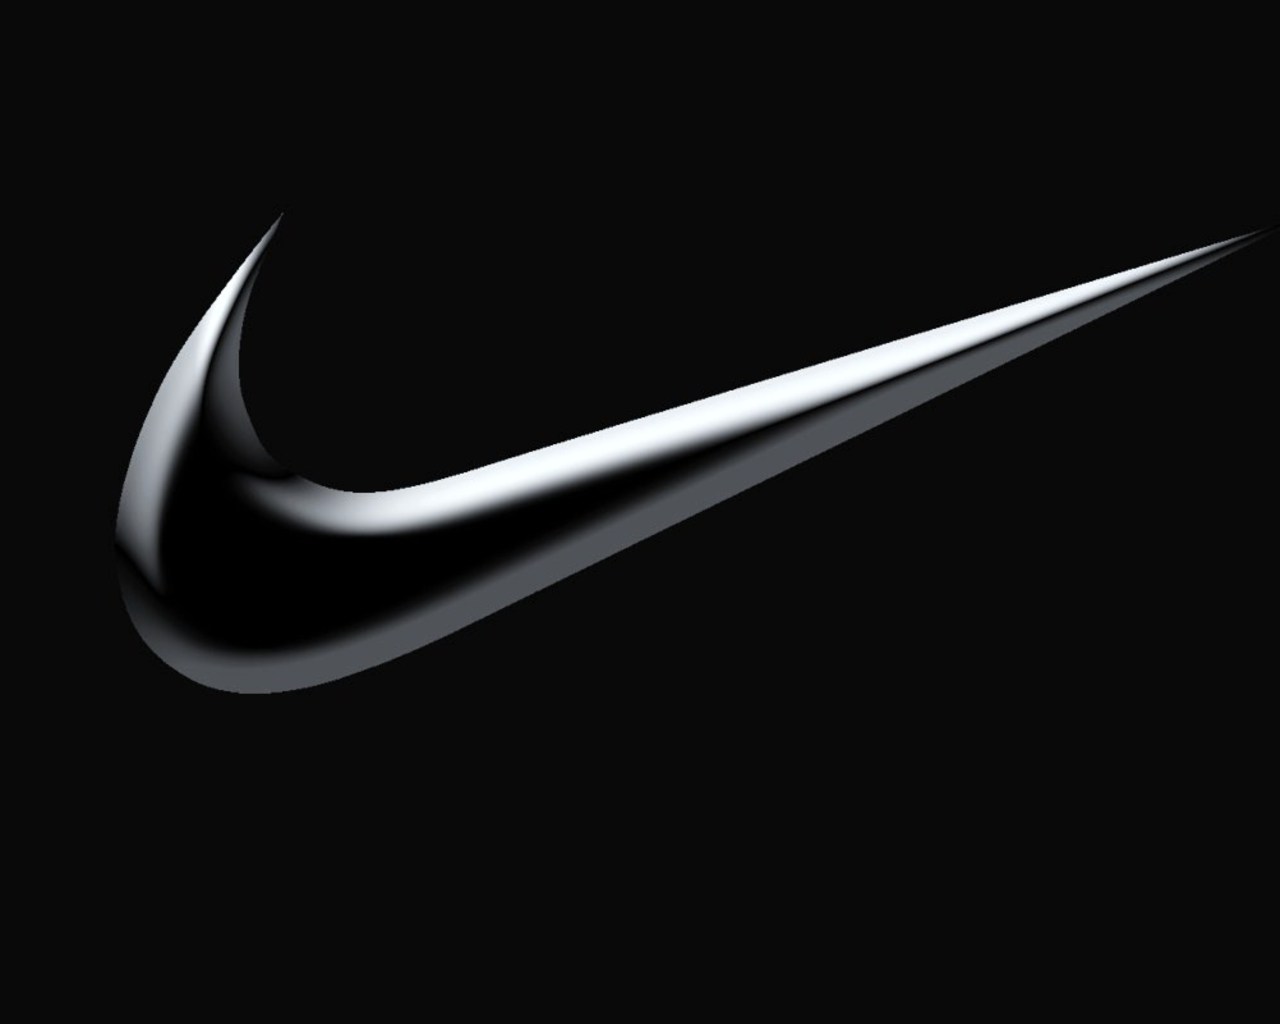 Gold Nike Logo Wallpaper Image Amp Pictures Becuo